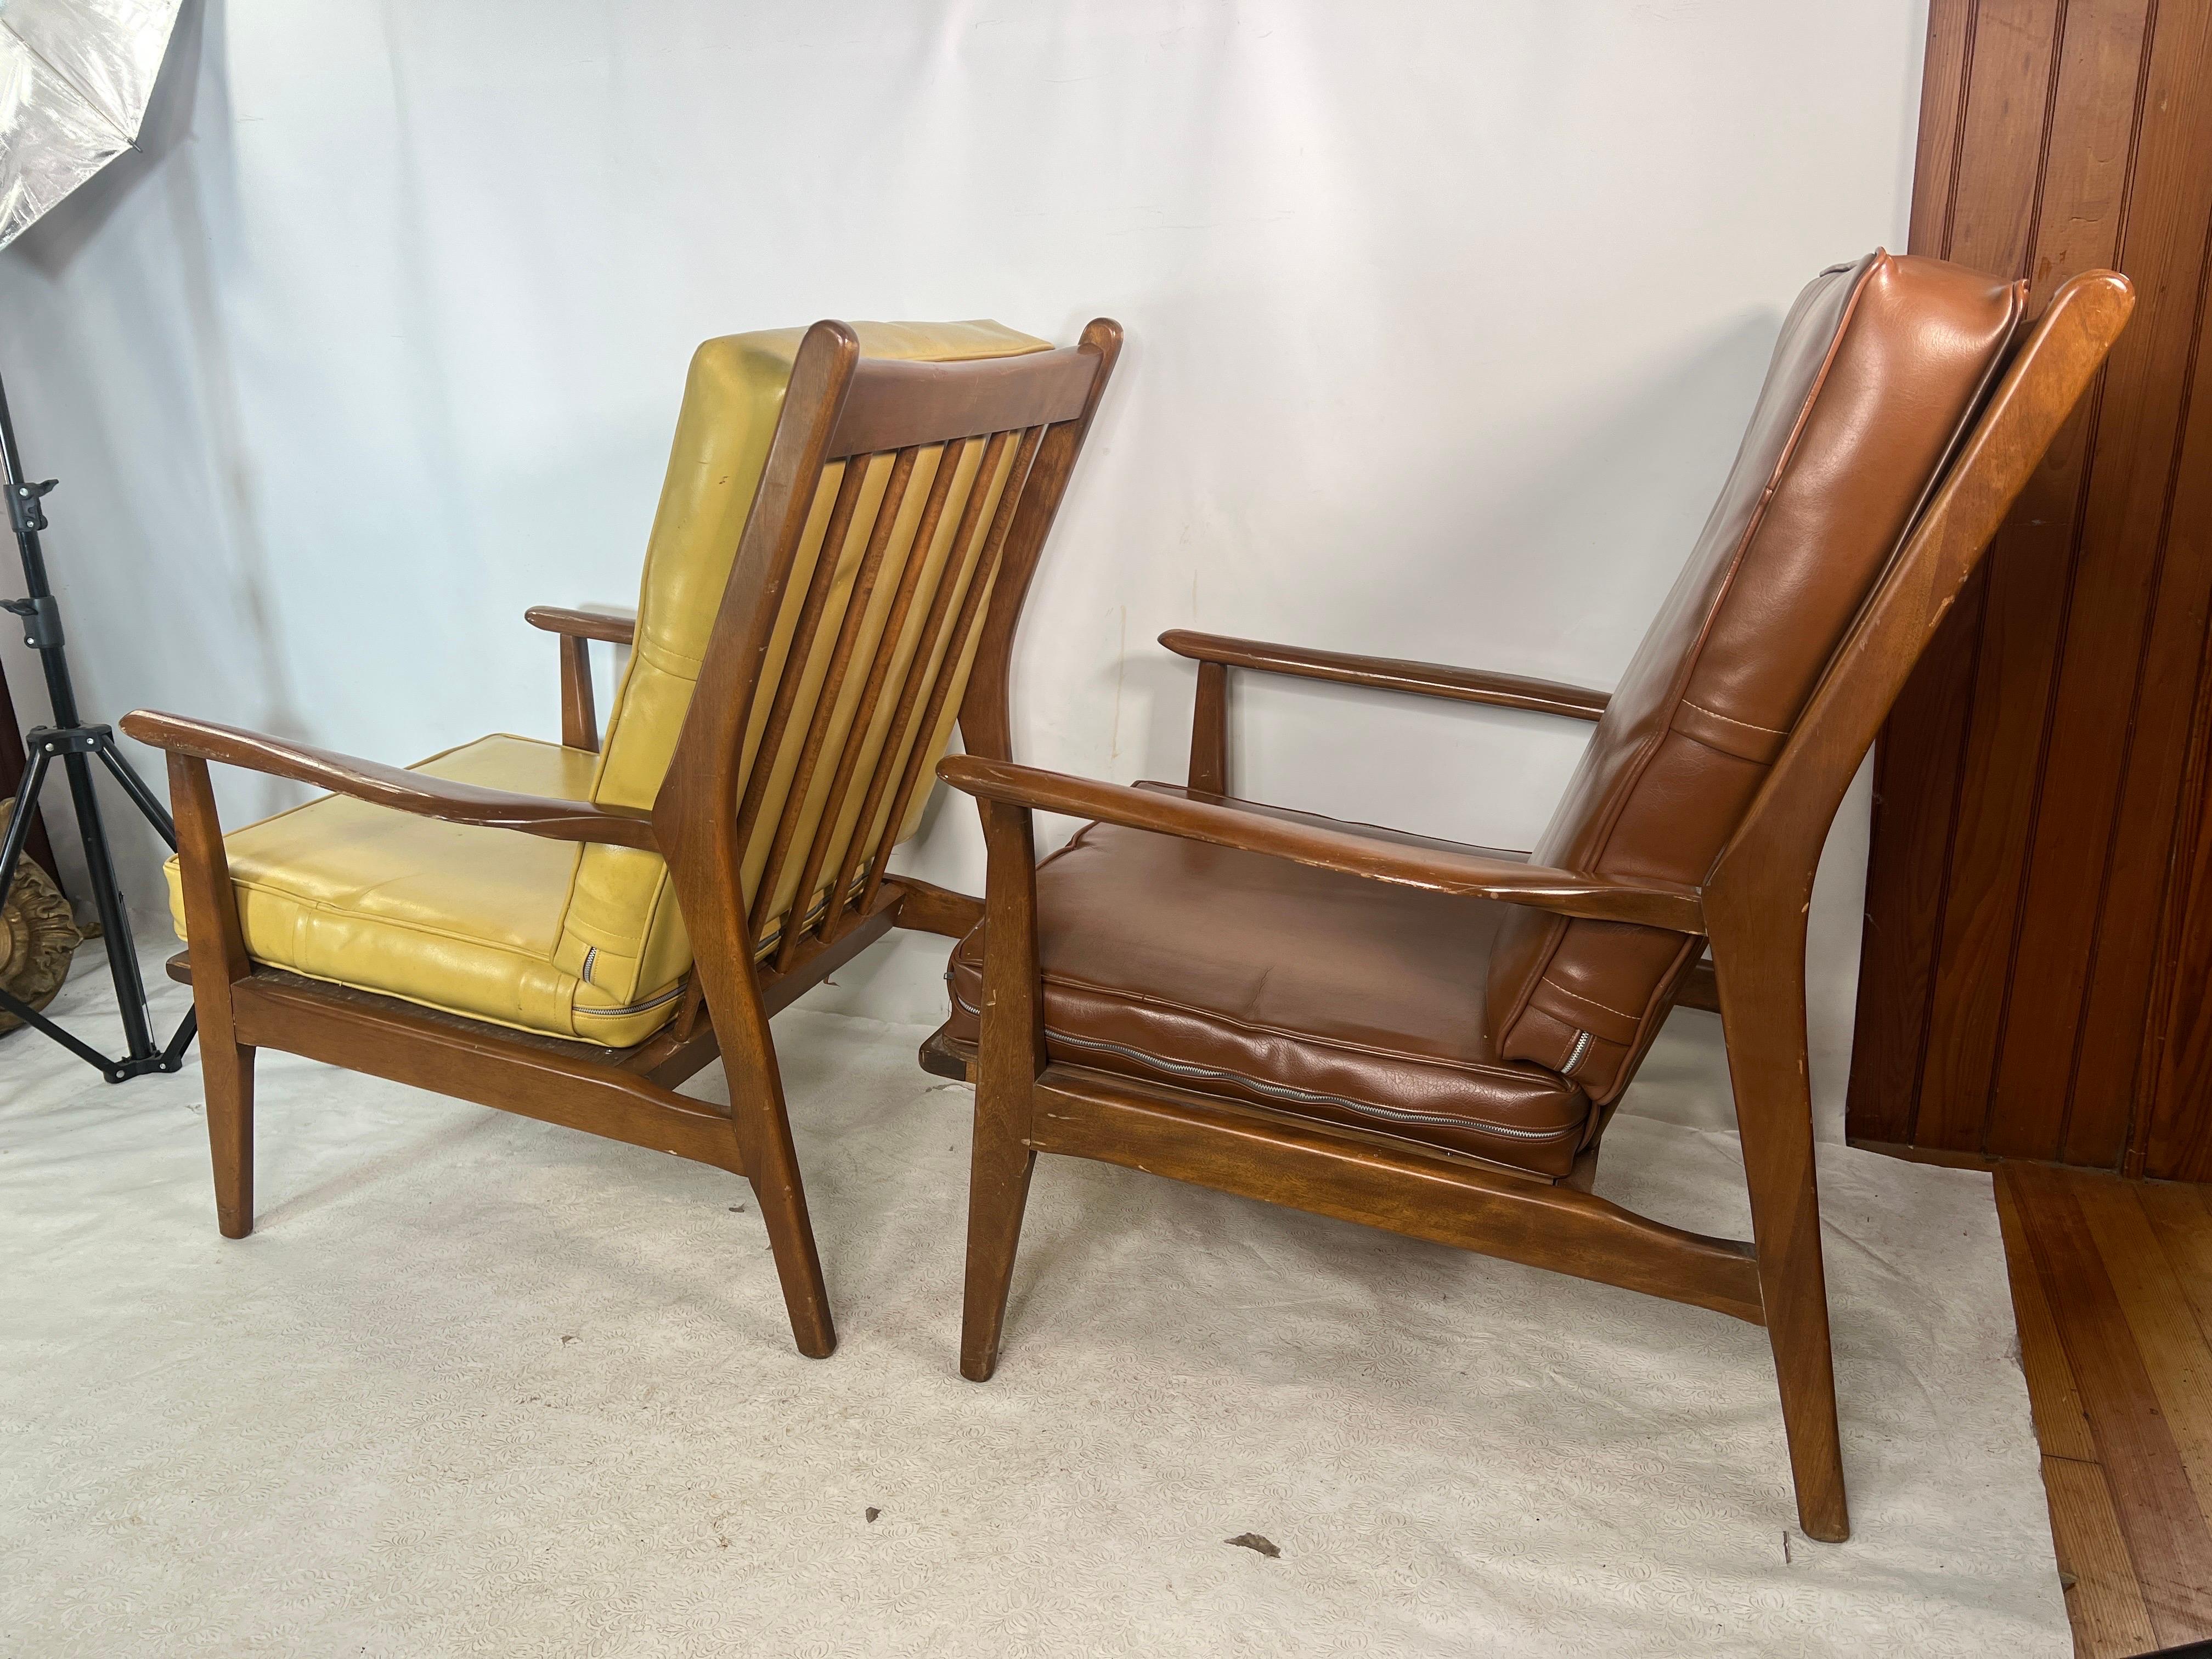 For sale is this great pair of vintage lounge chairs that are made out of walnut.